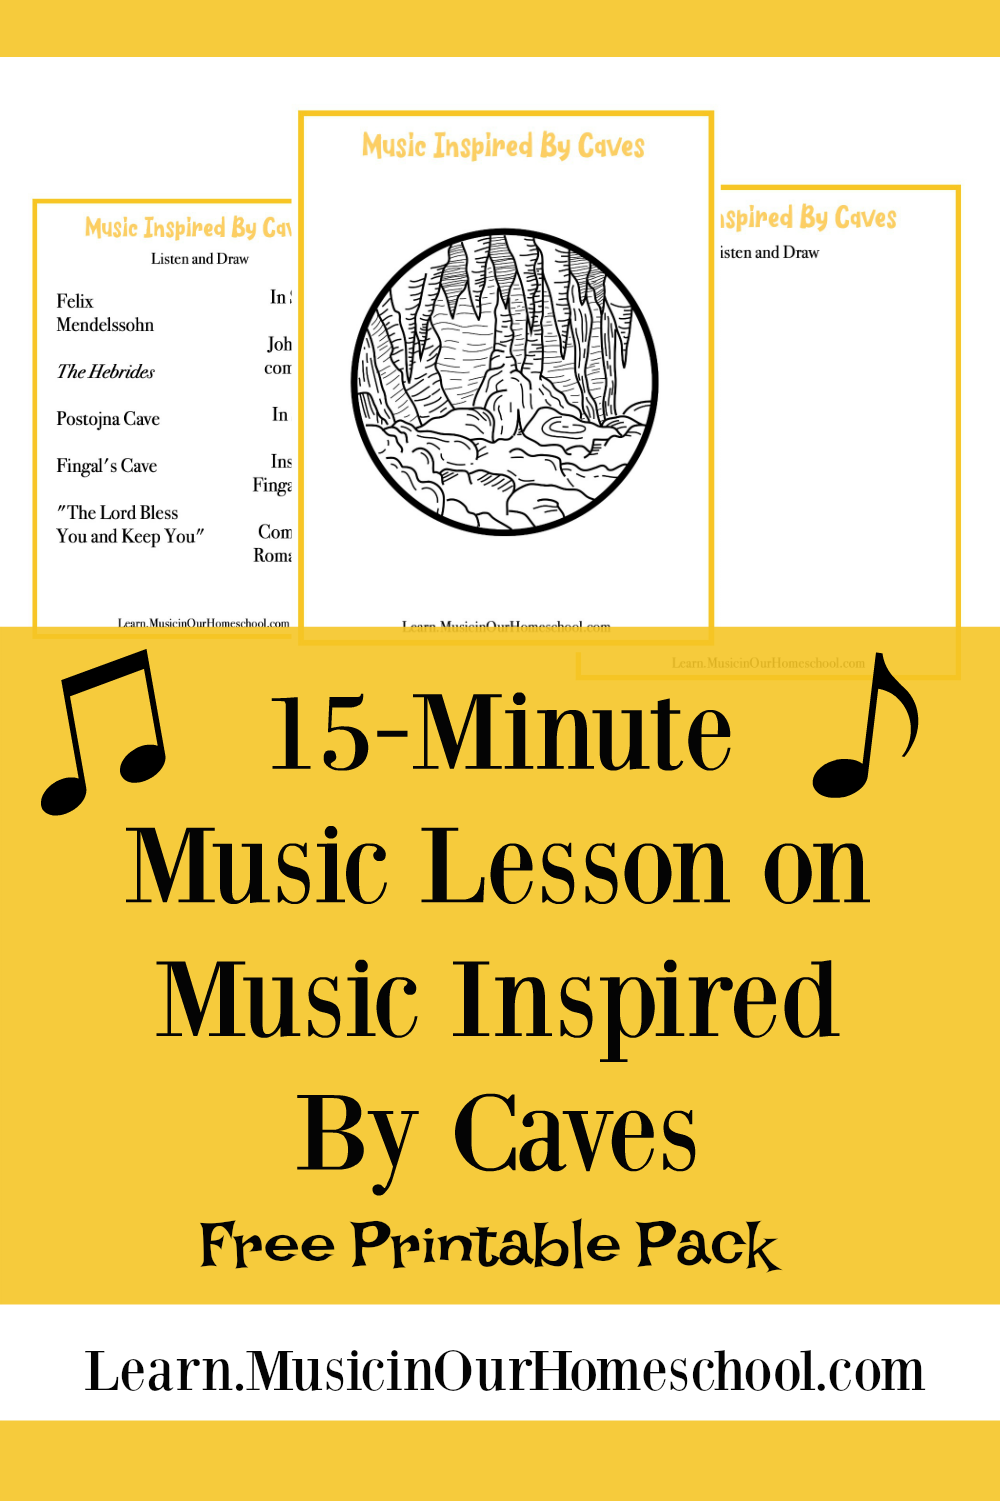 Music Inspired By Caves free printable pack